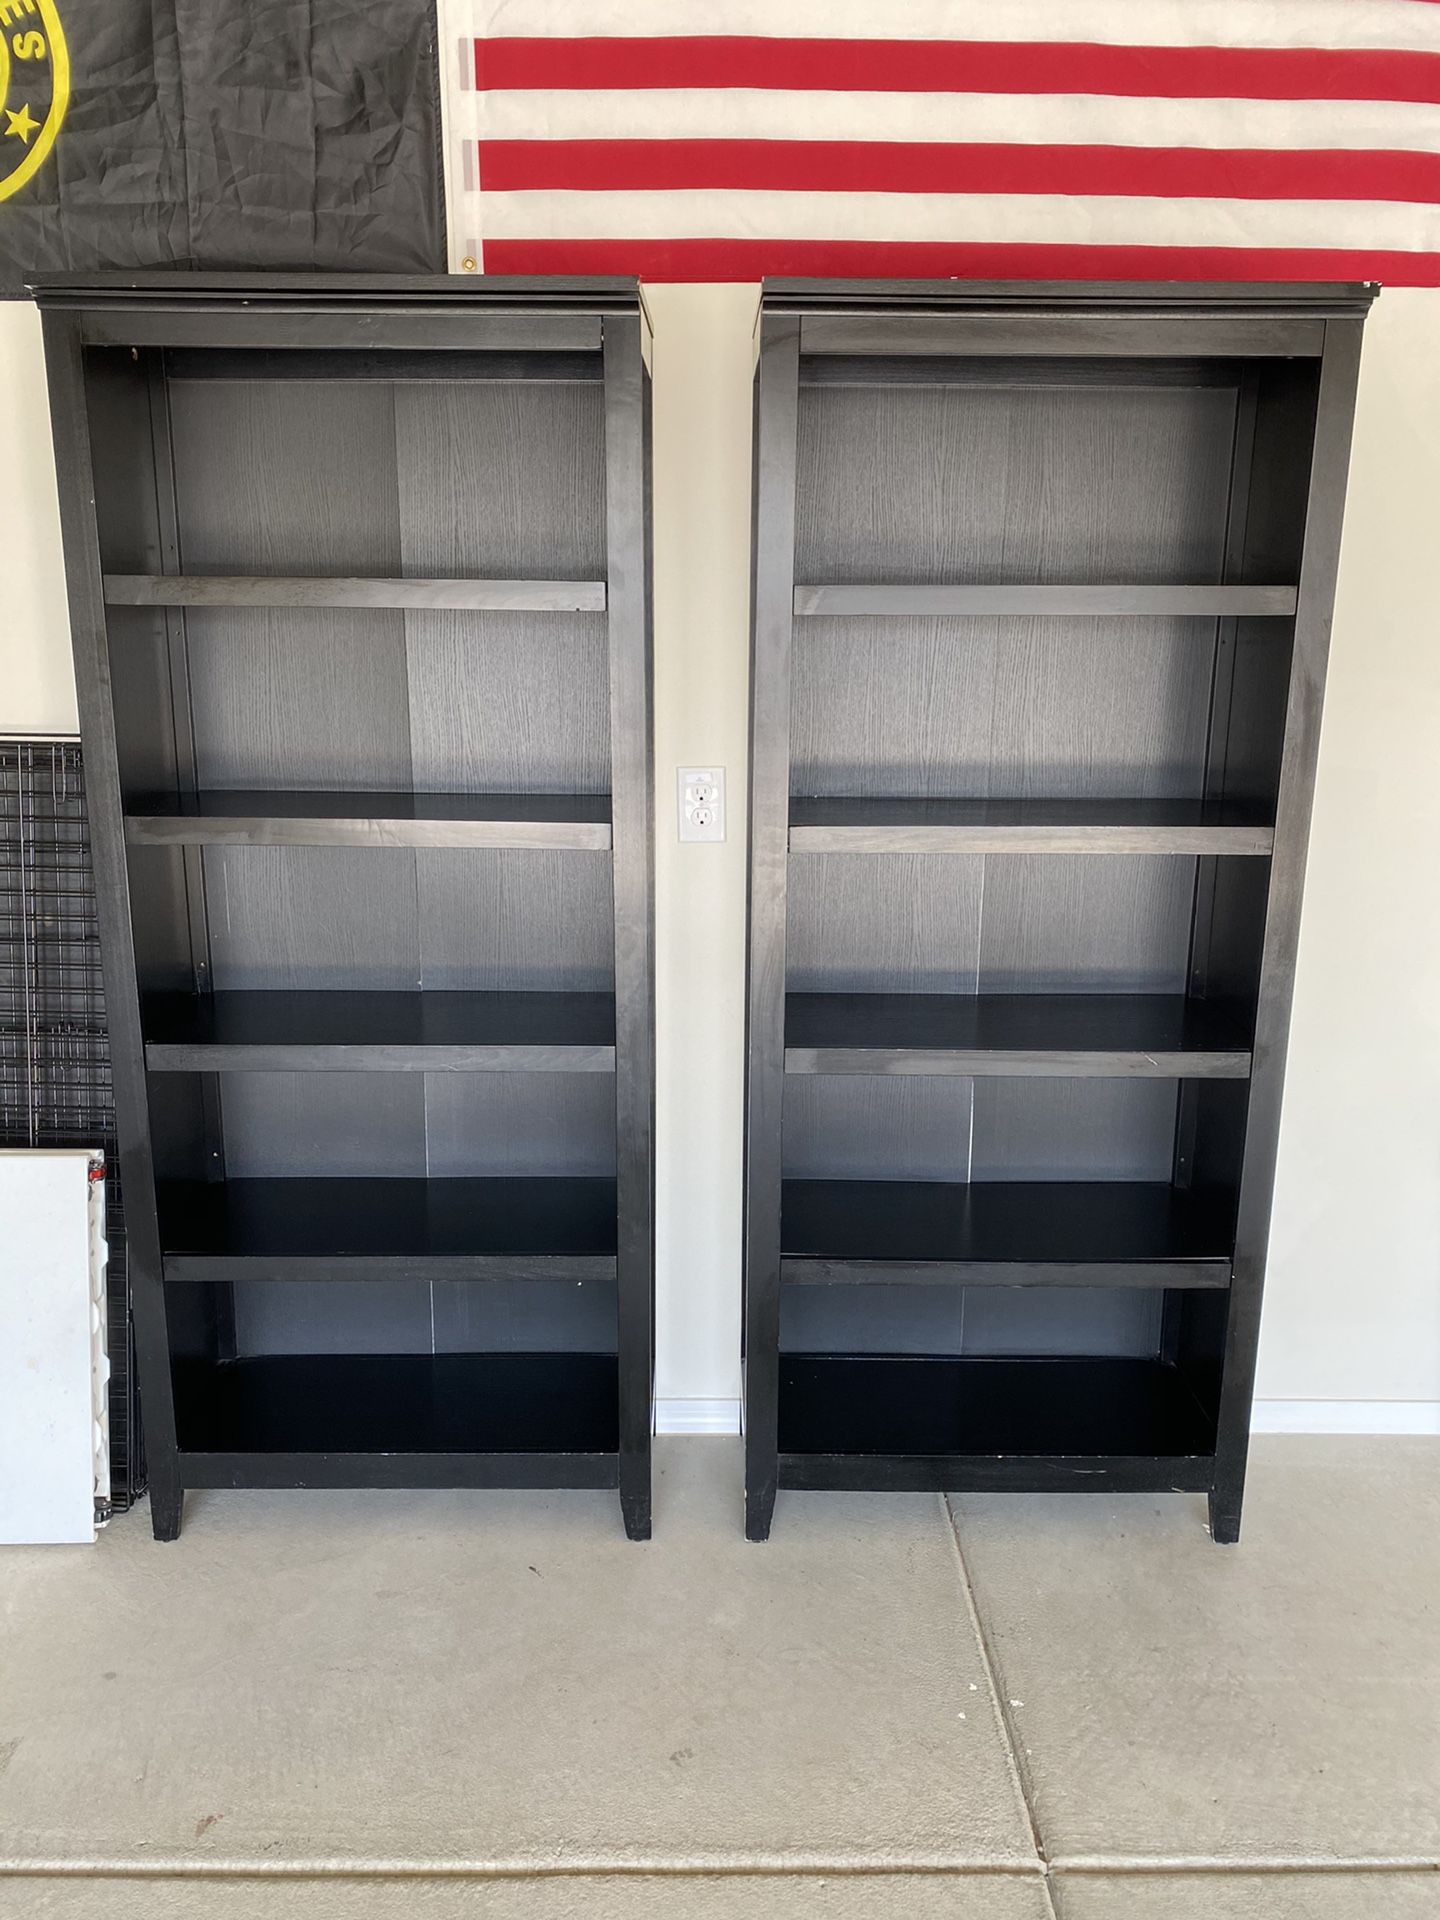 Bookshelves (One for $60. Two for $100.)